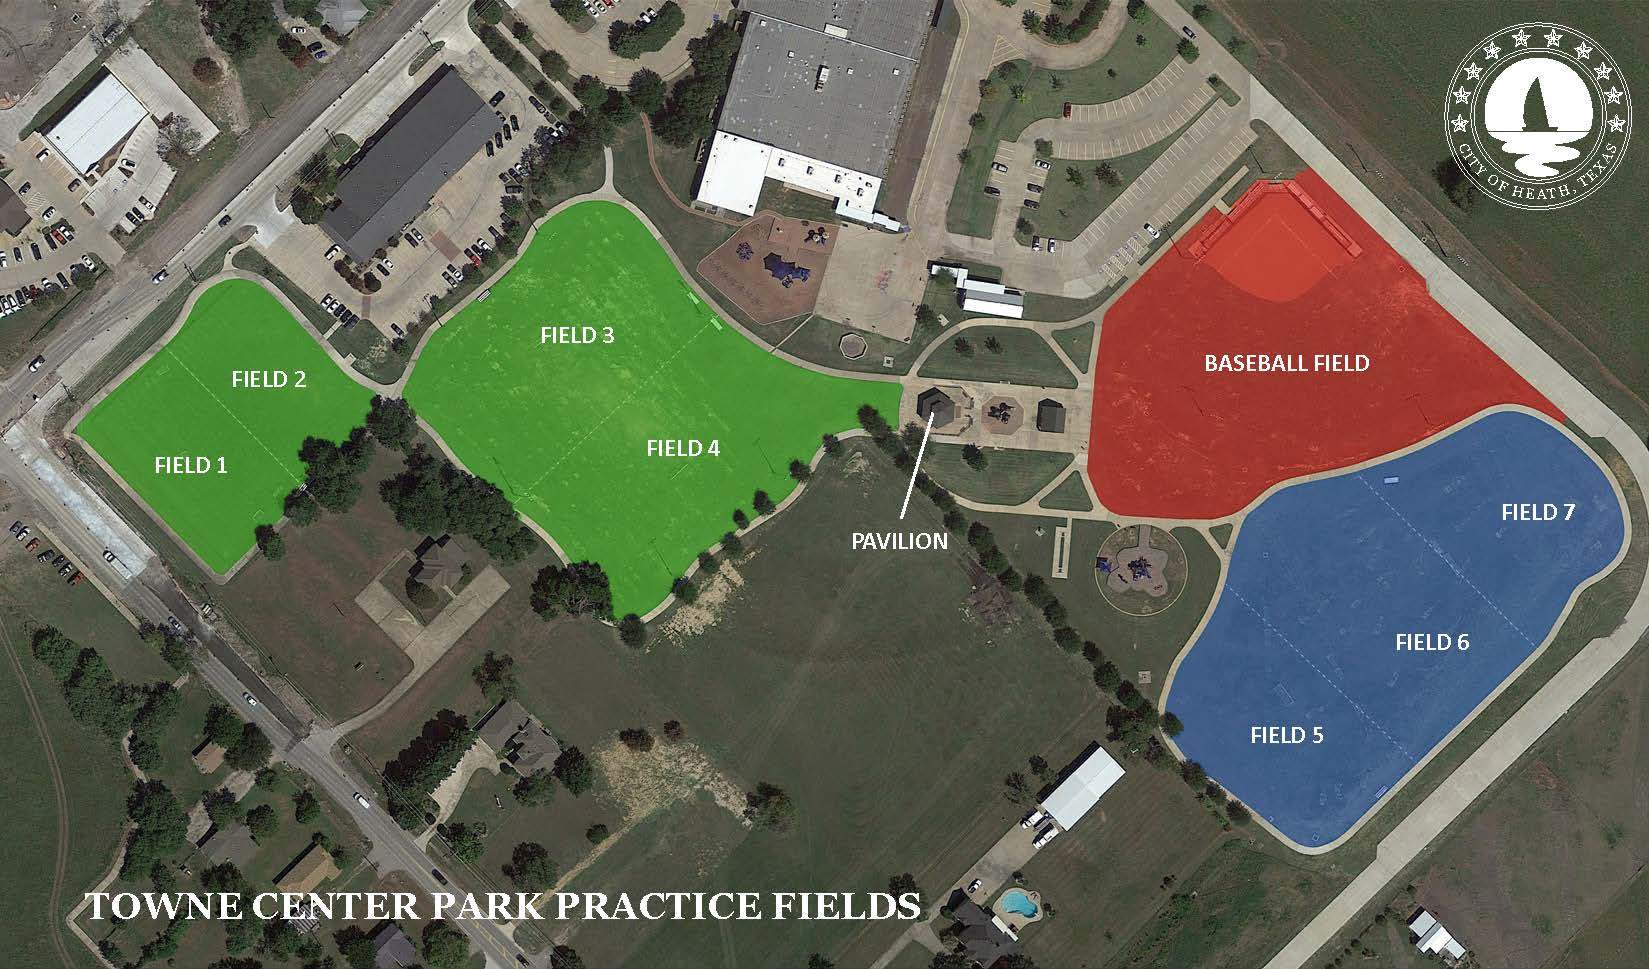 Towne-Center-Park-Field-Map2(1)_CROPPED